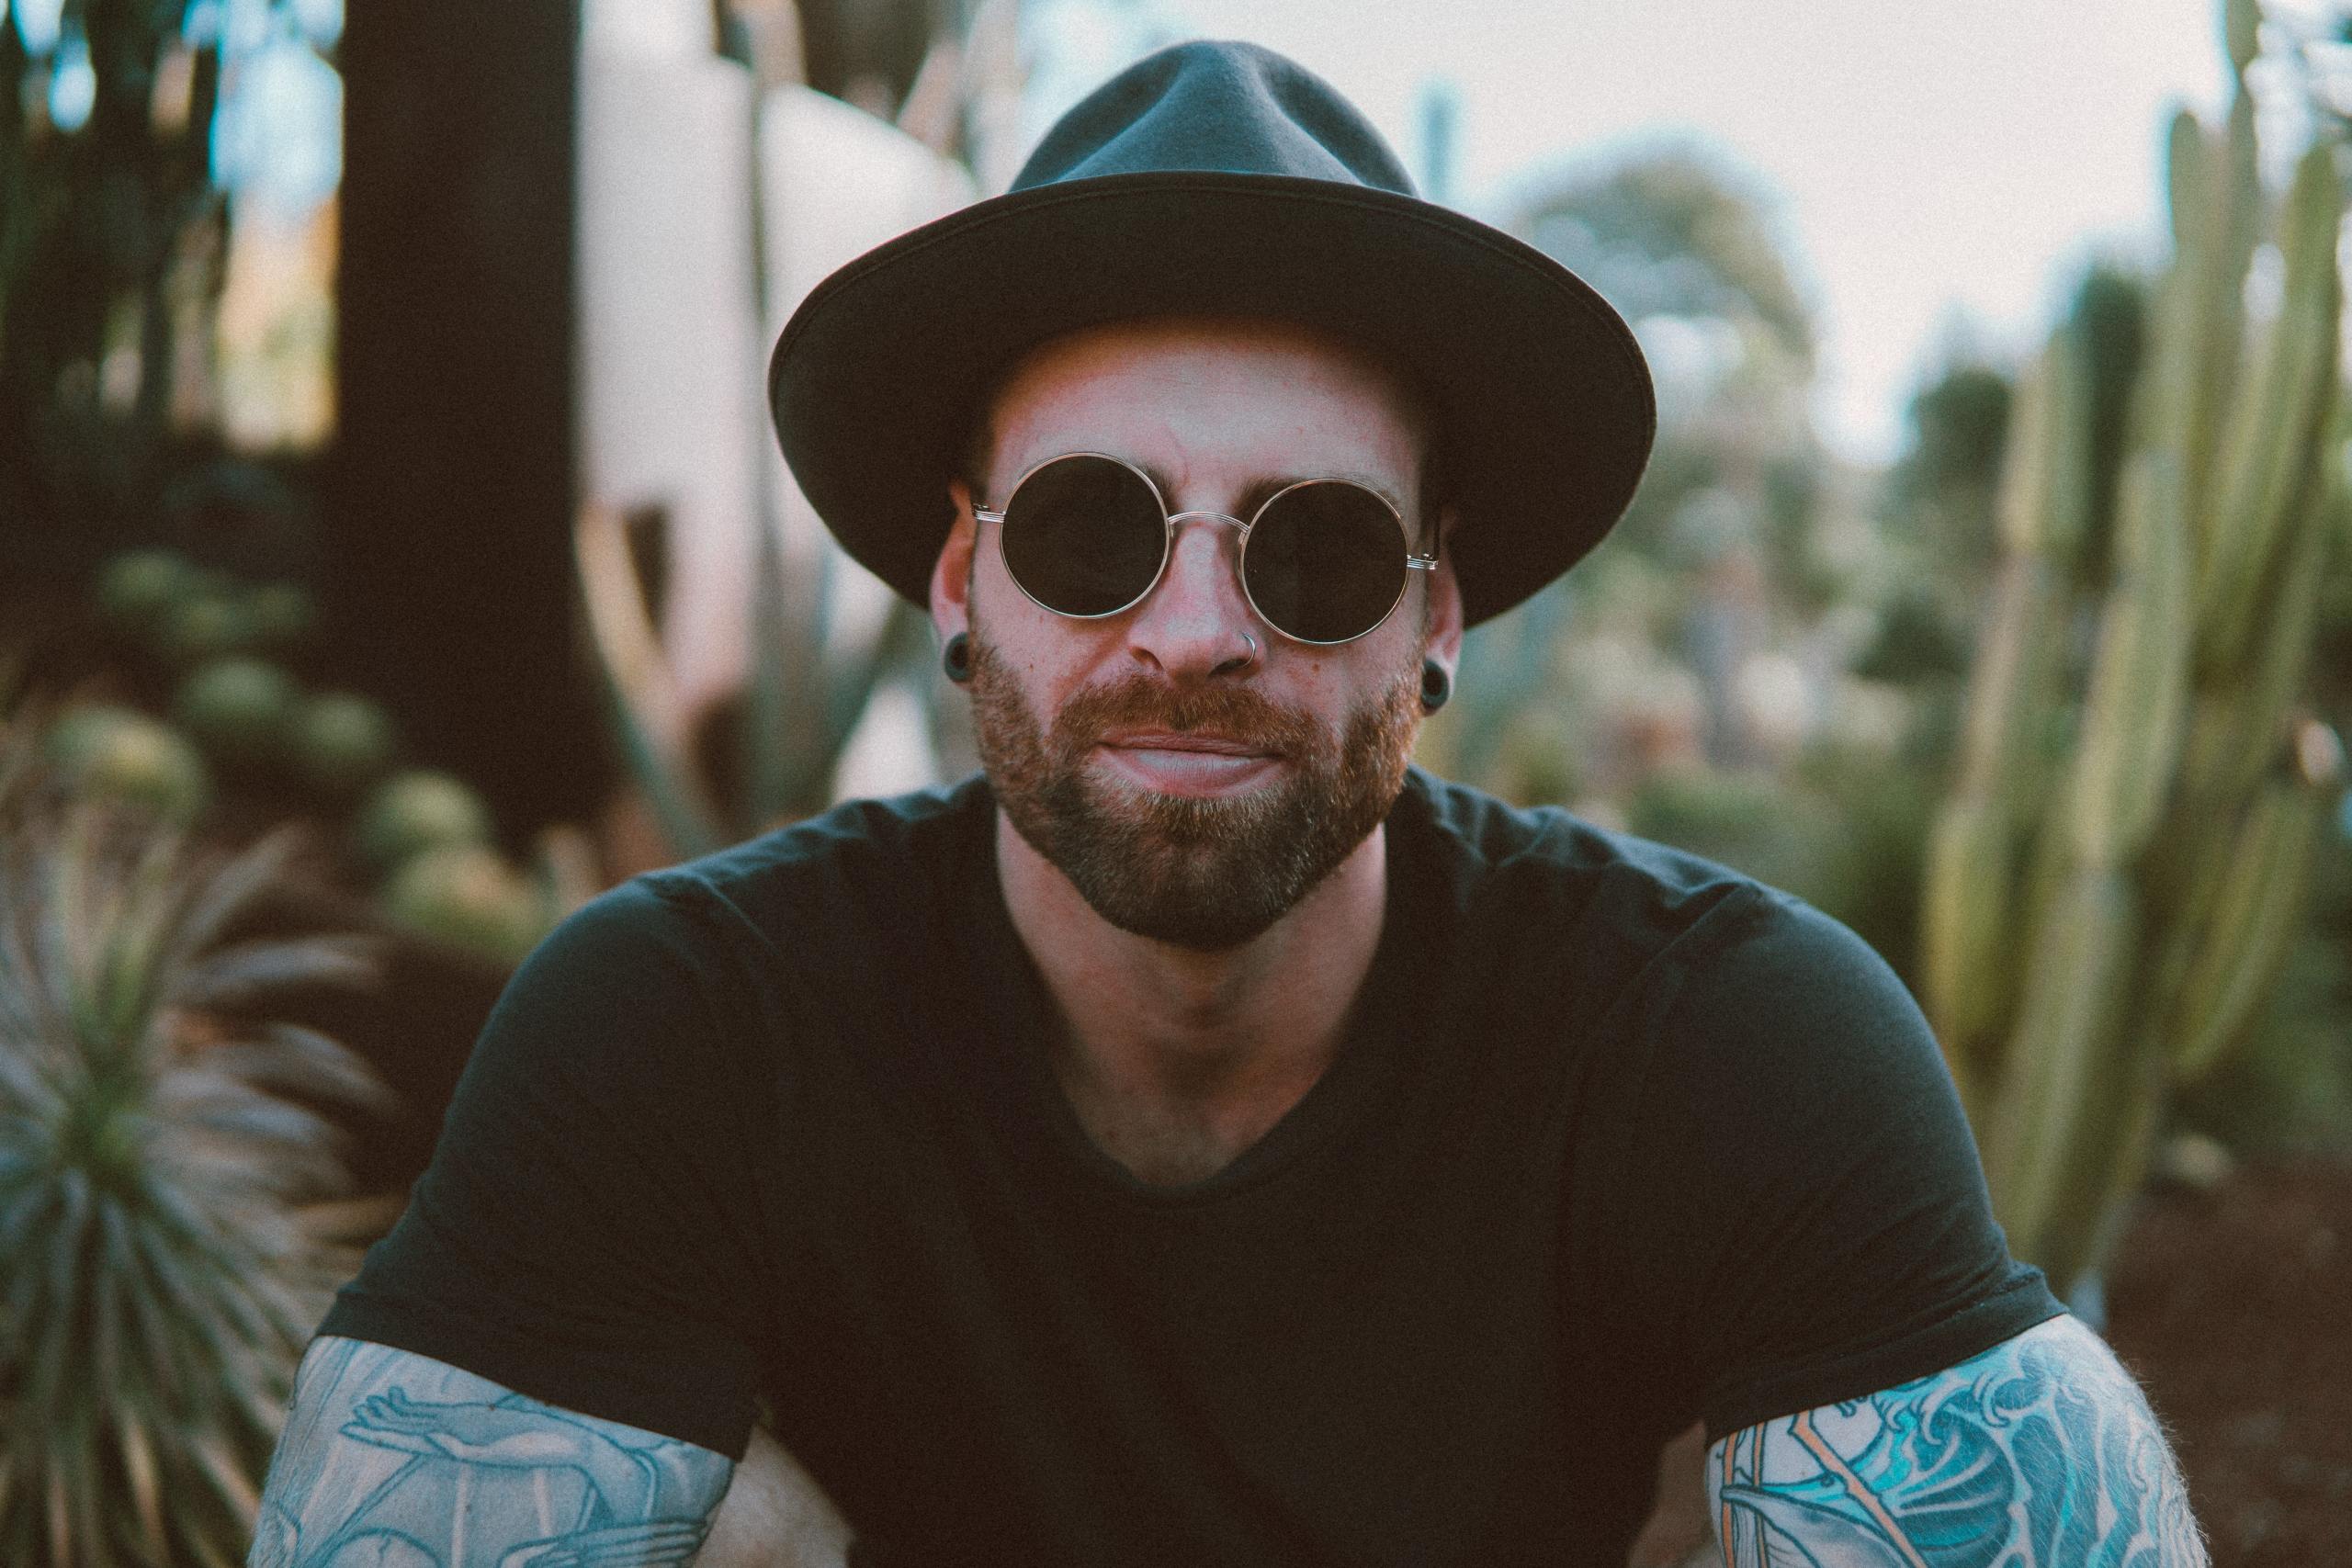 tattooed man in sunglasses and hat